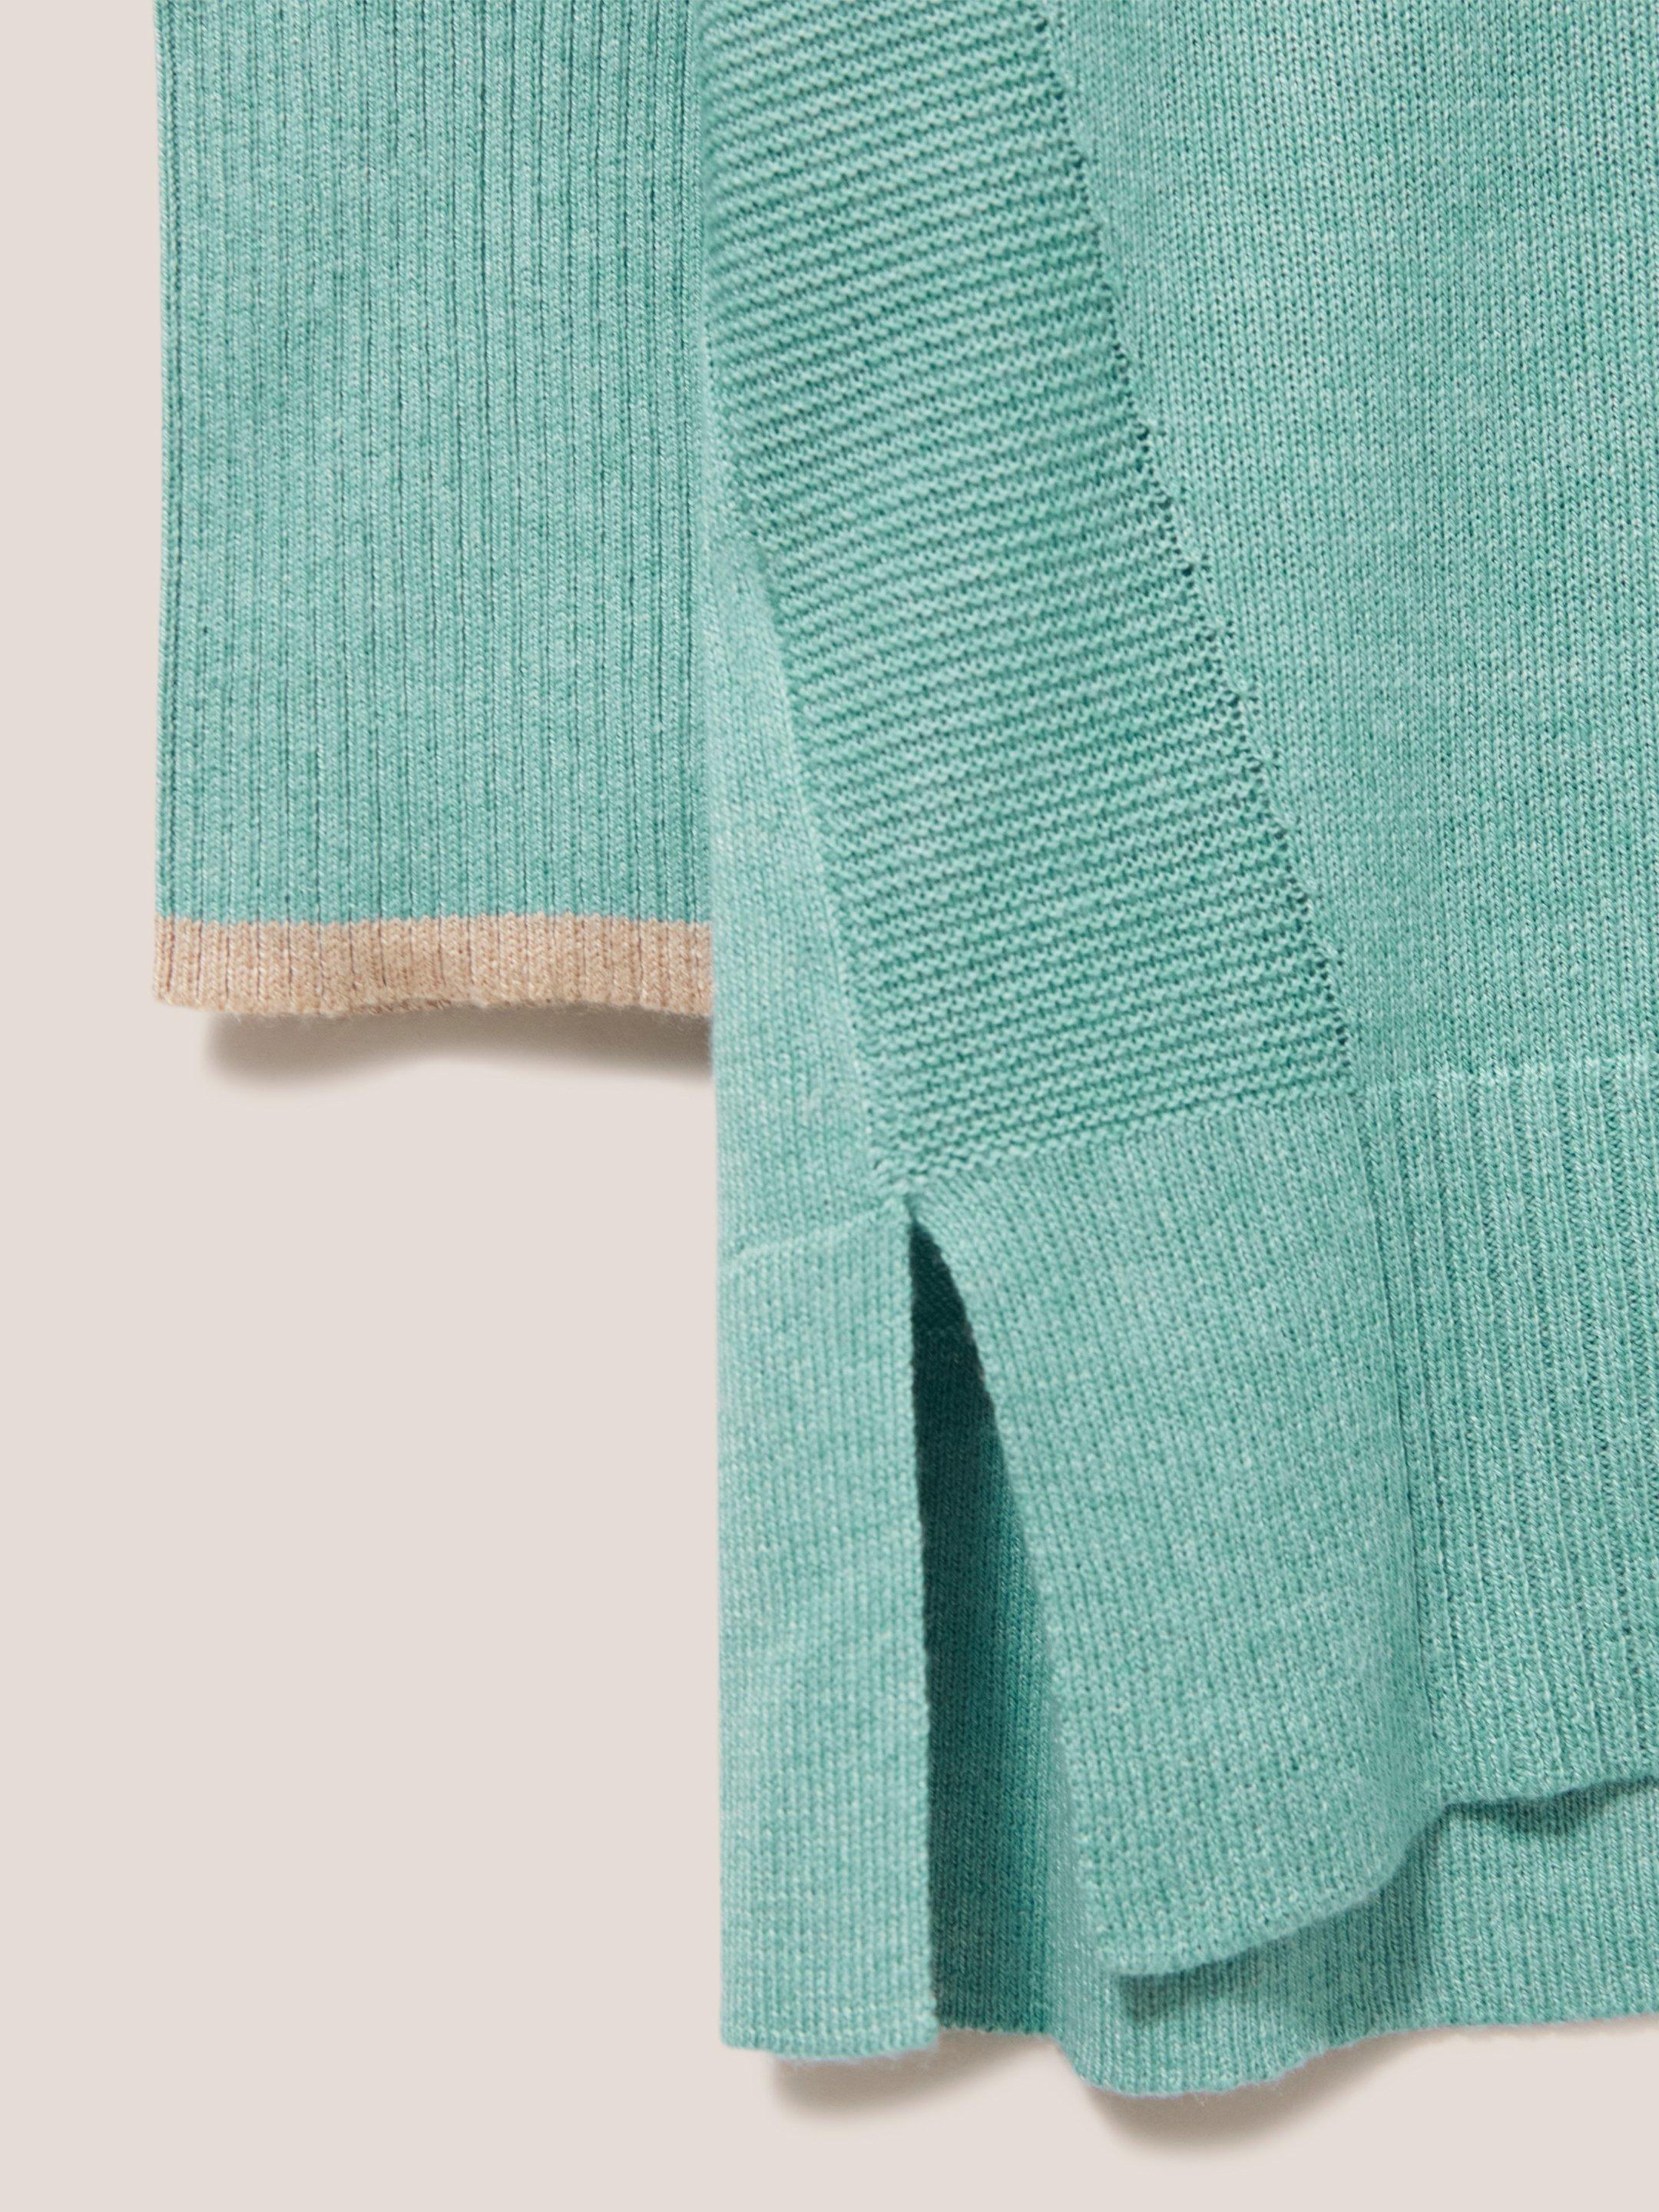 OLIVE CARDI in MID TEAL - FLAT DETAIL